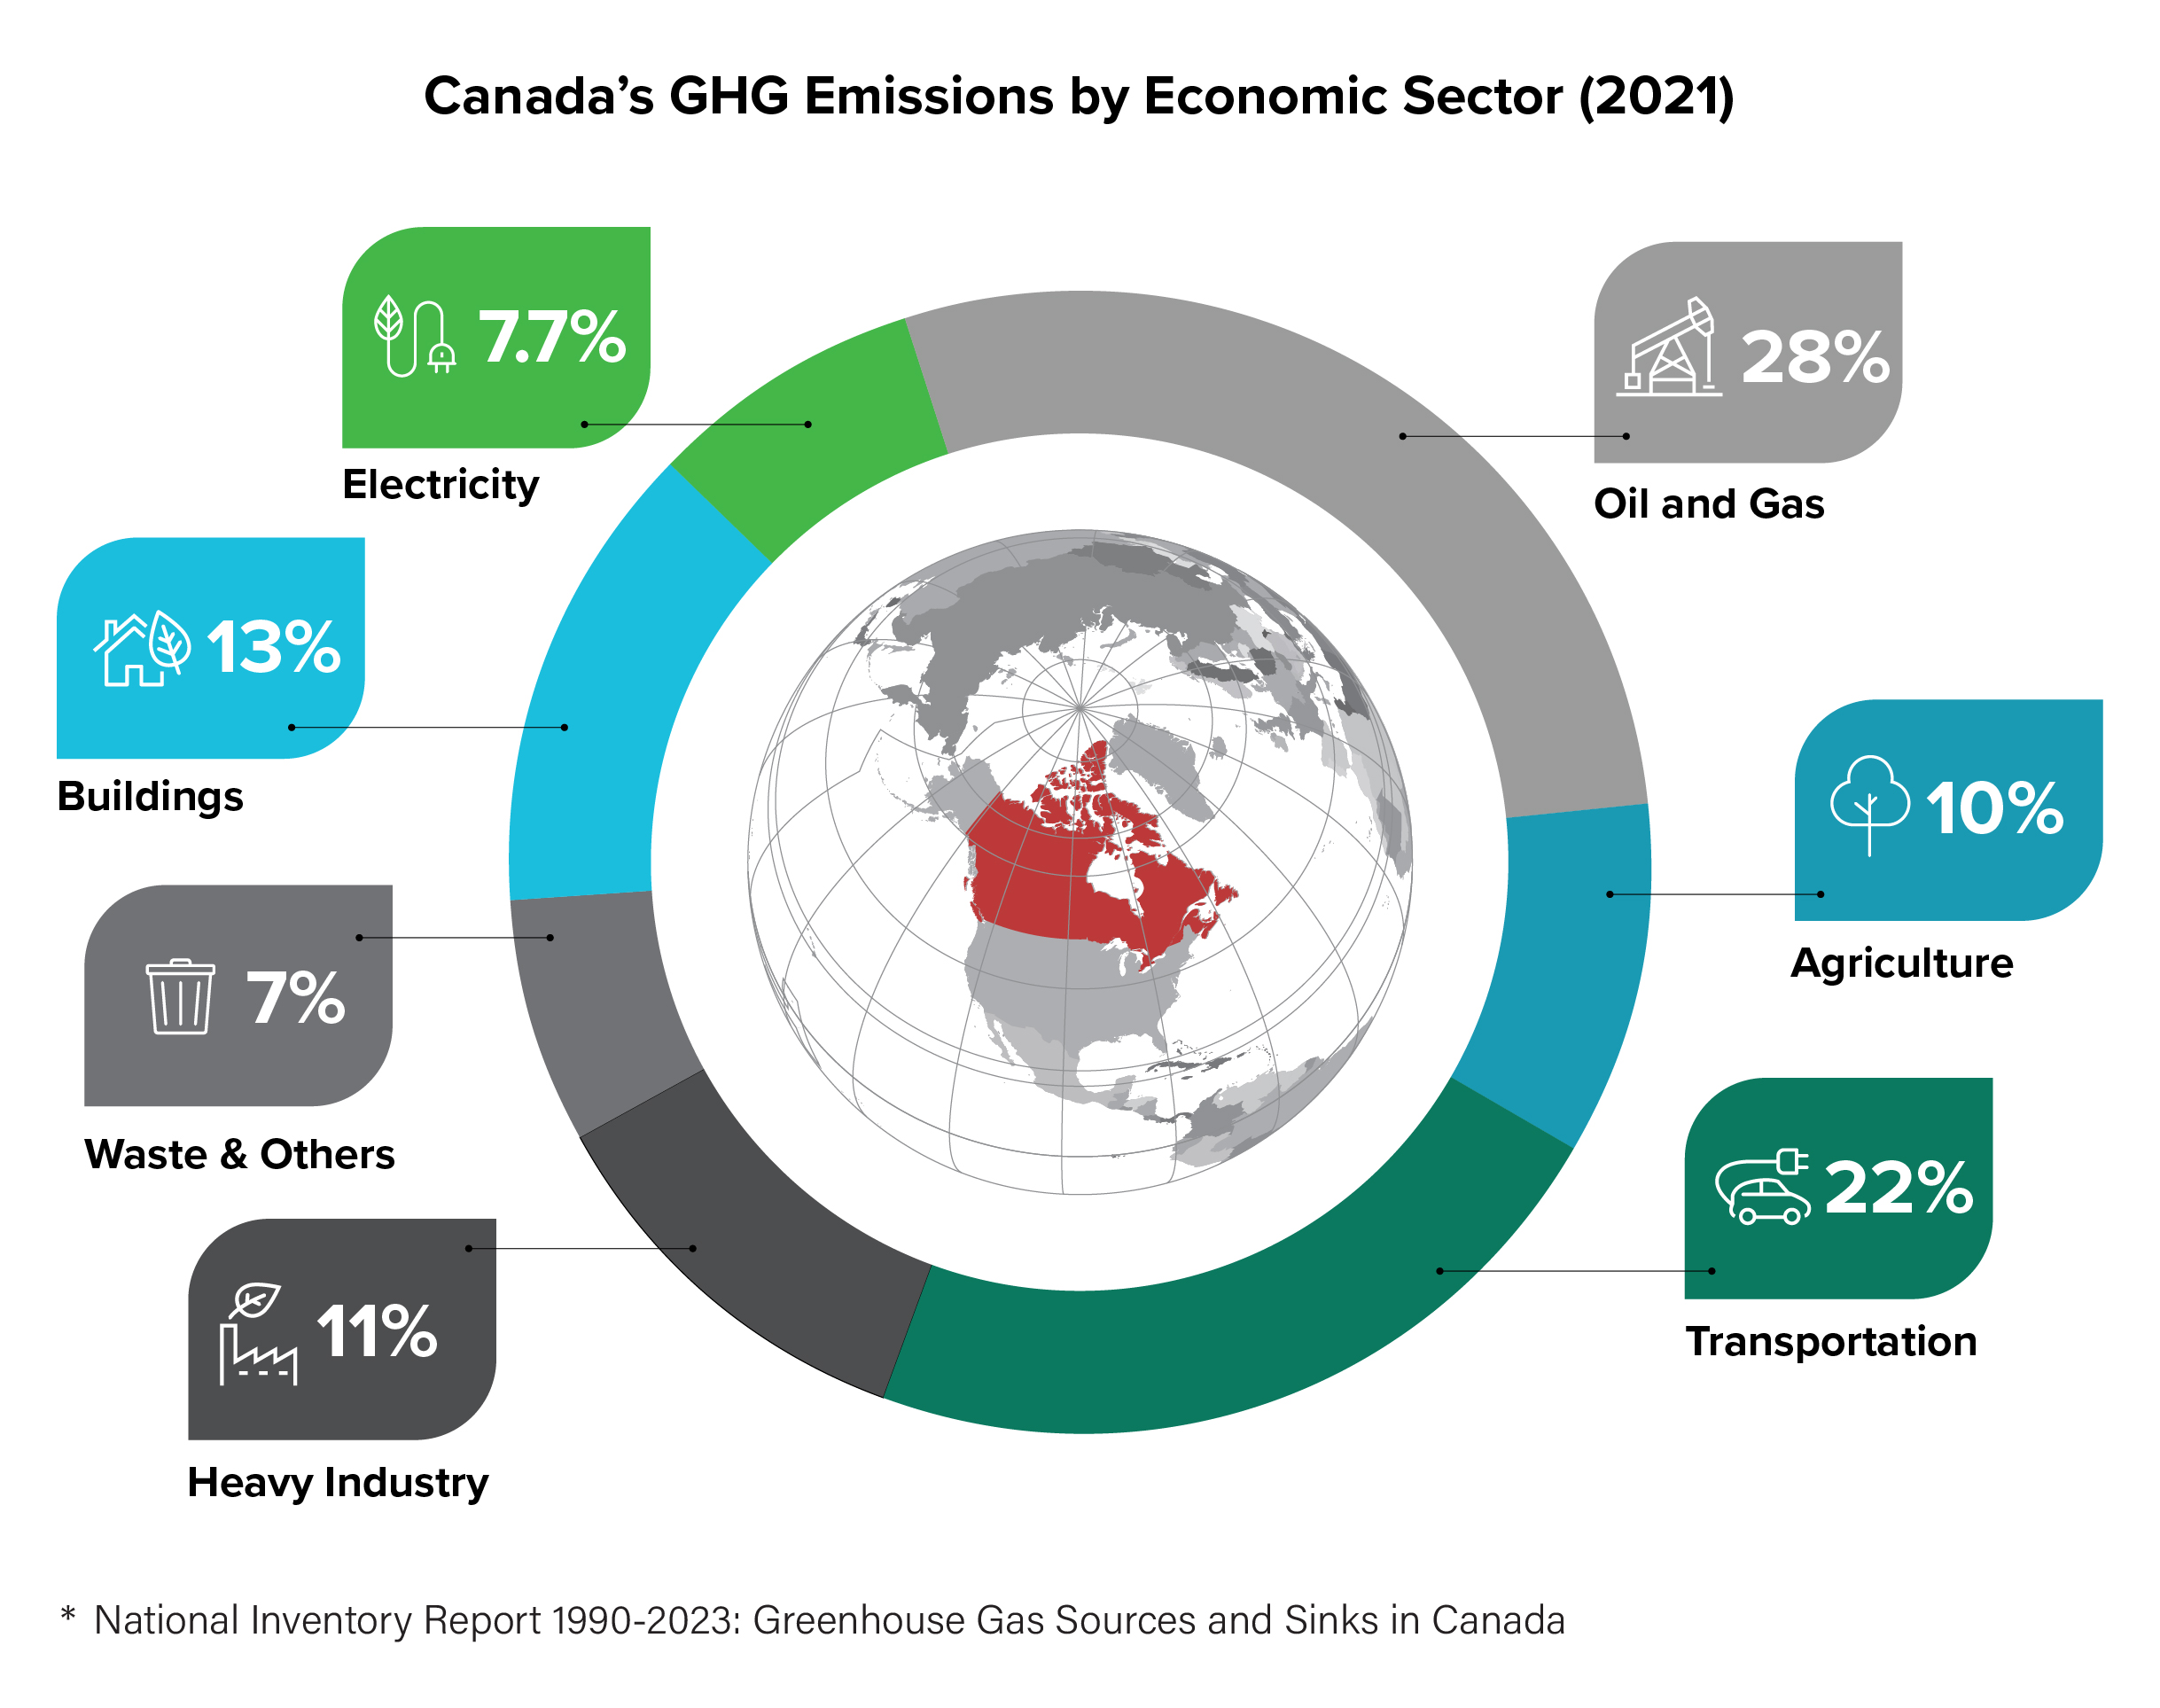 Breakdown of Canada's greenhouse gas emissions by economic sector (2021)